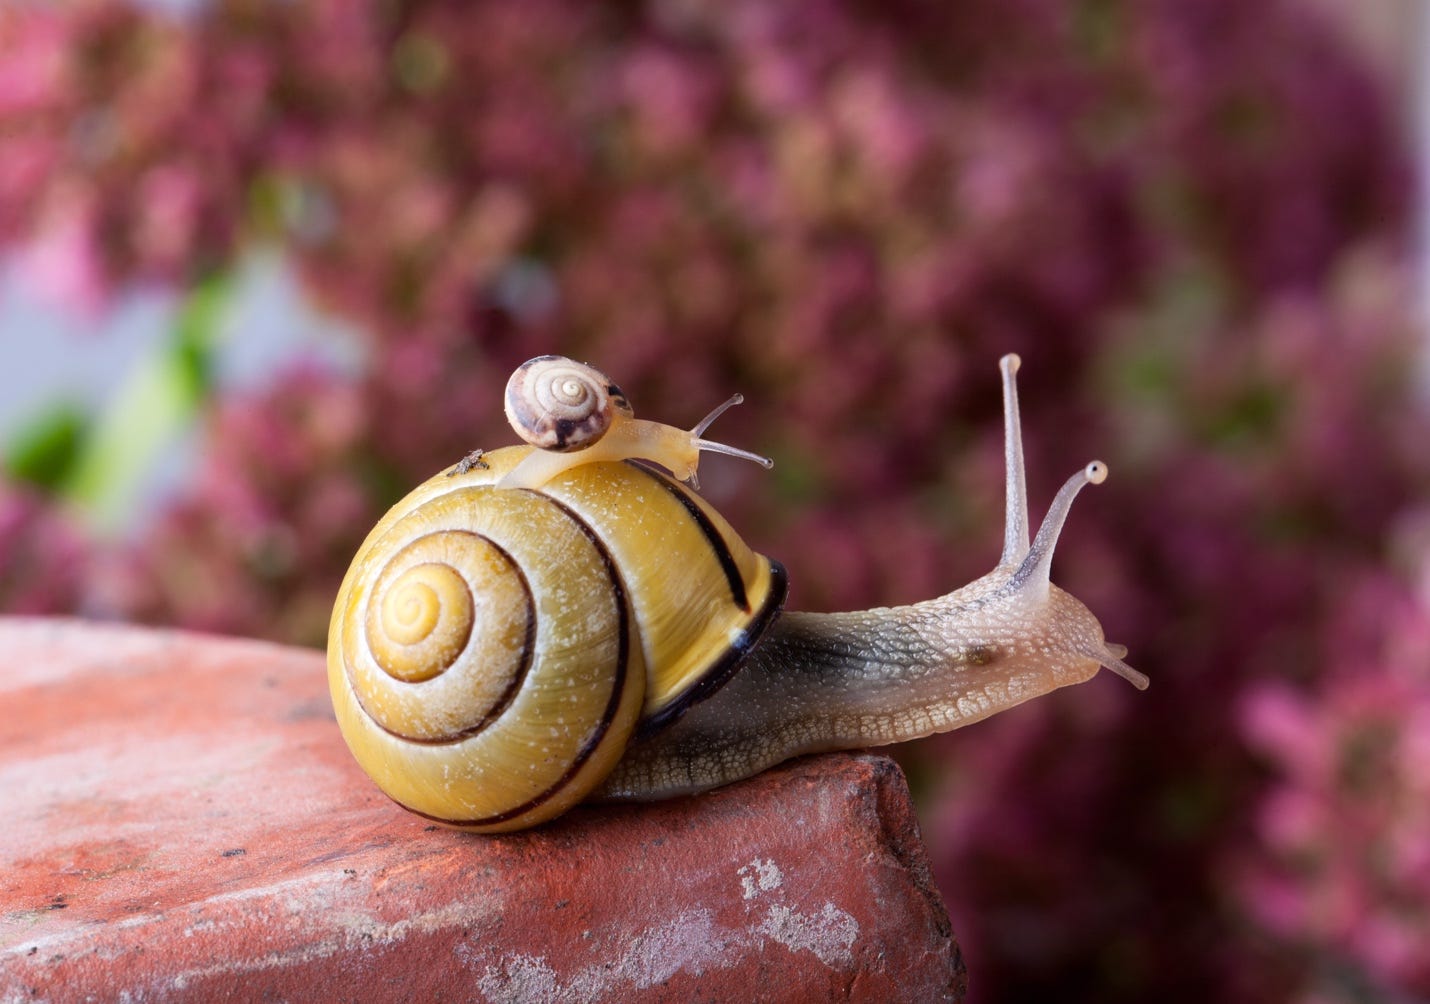 A snail on a rock

Description automatically generated